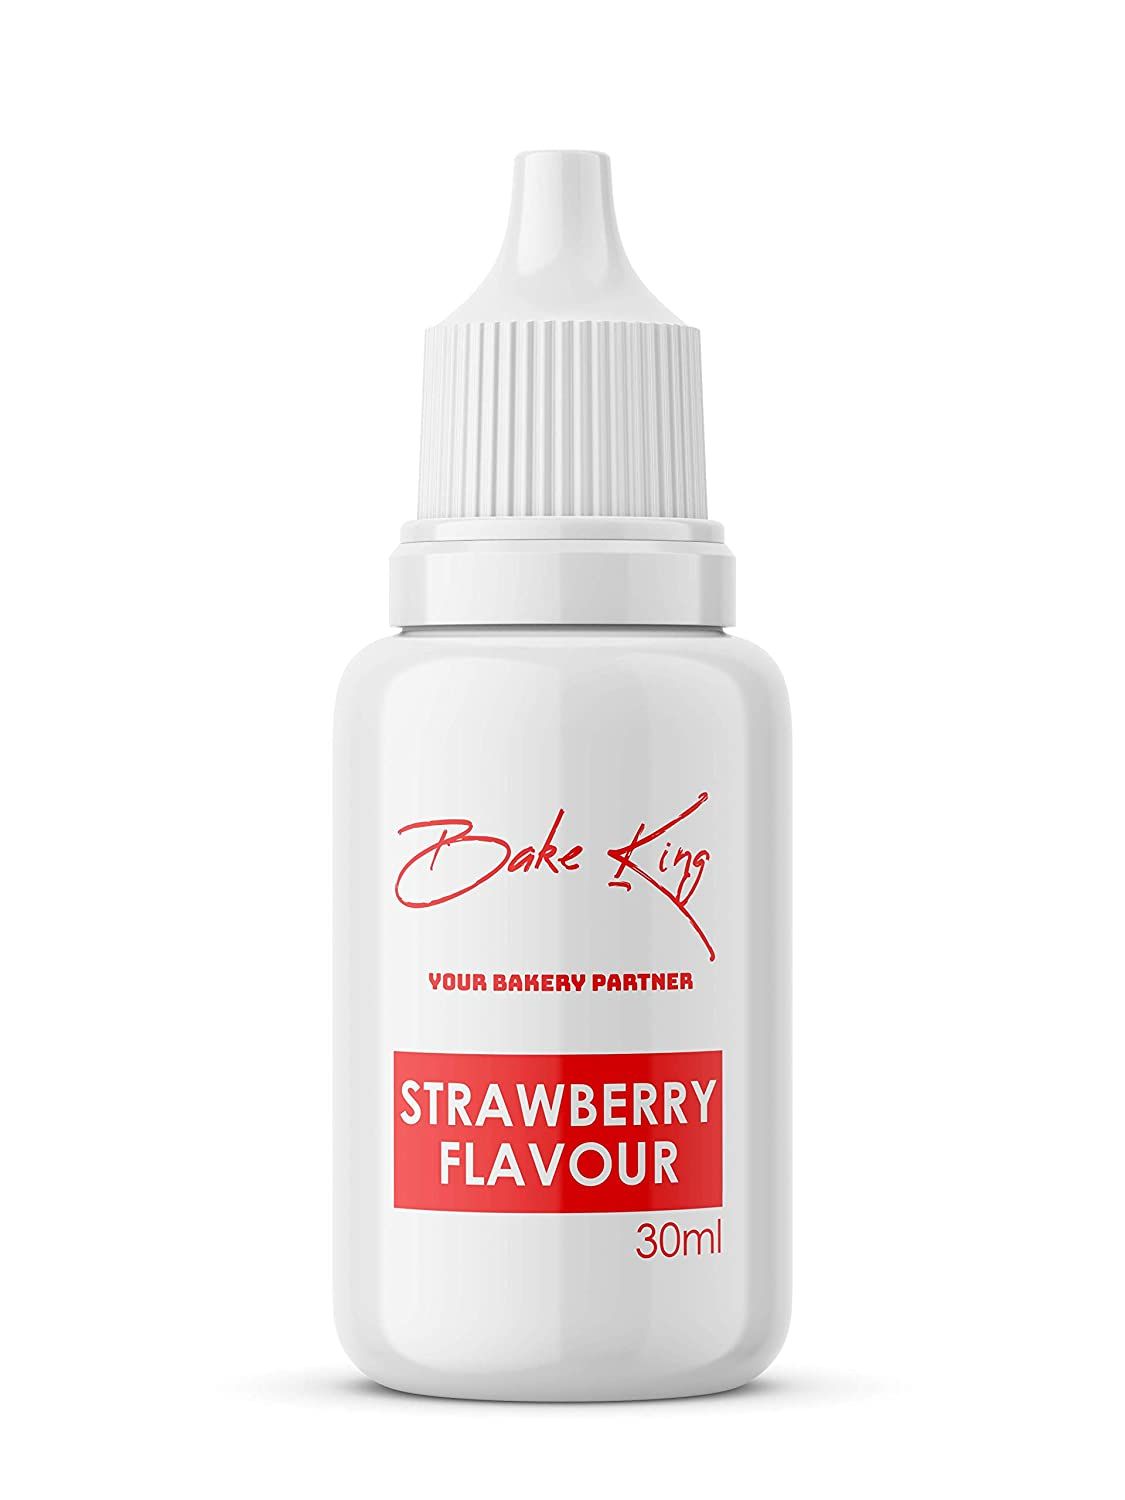 BAKE KING Strawberry Flavour Image